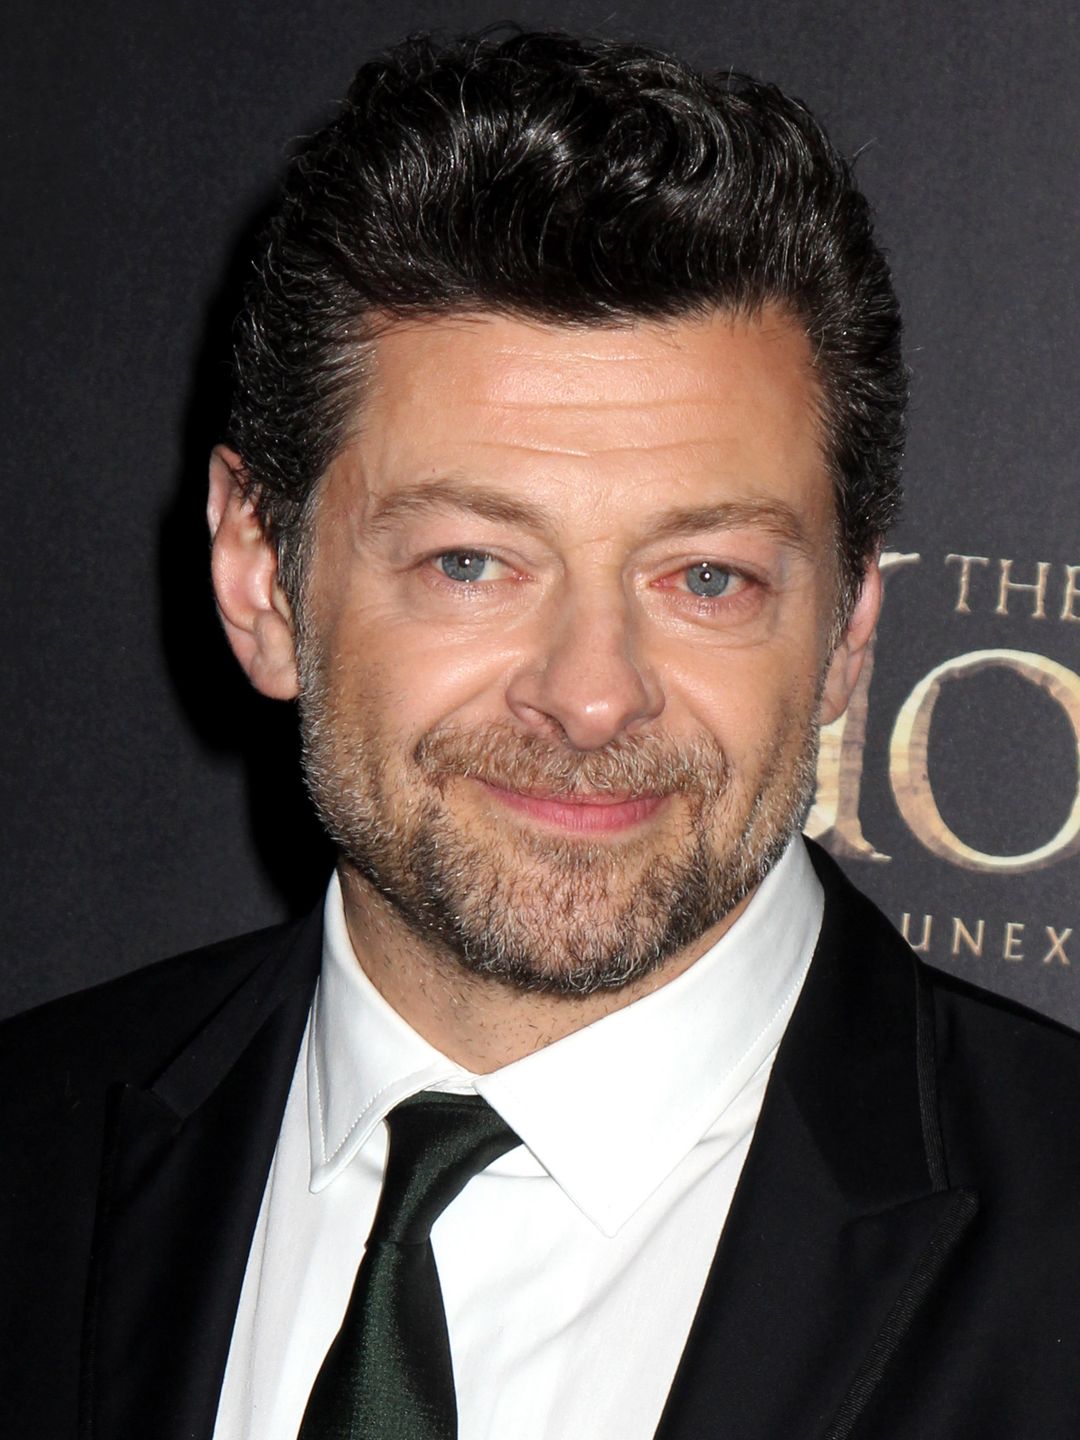 Andy Serkis does he have kids